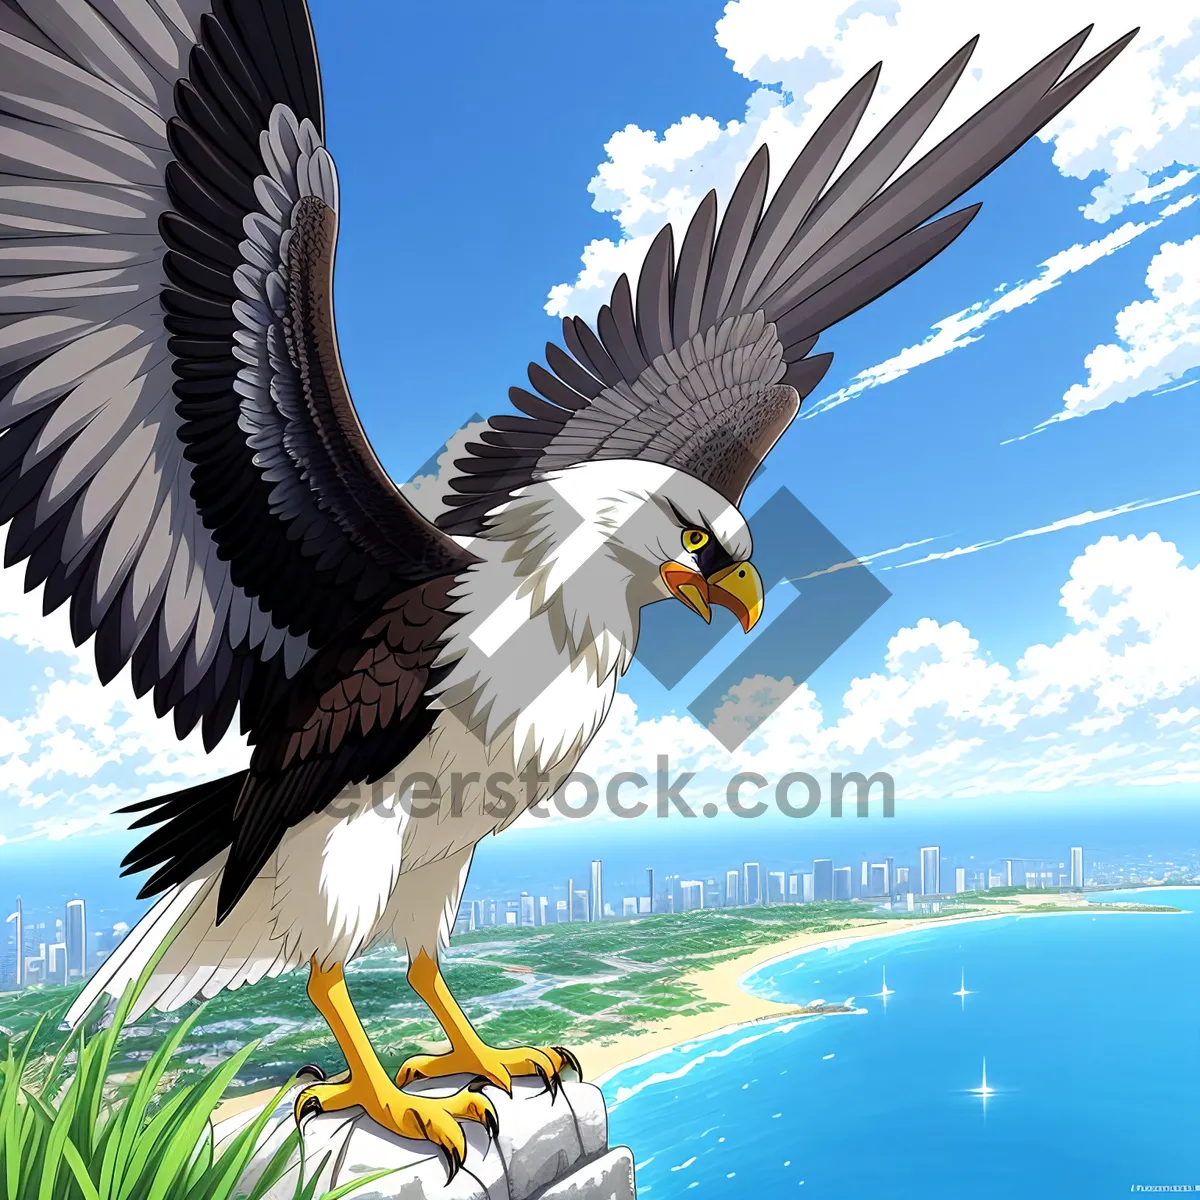 Picture of Magnificent Bald Eagle Soaring in the Sky.